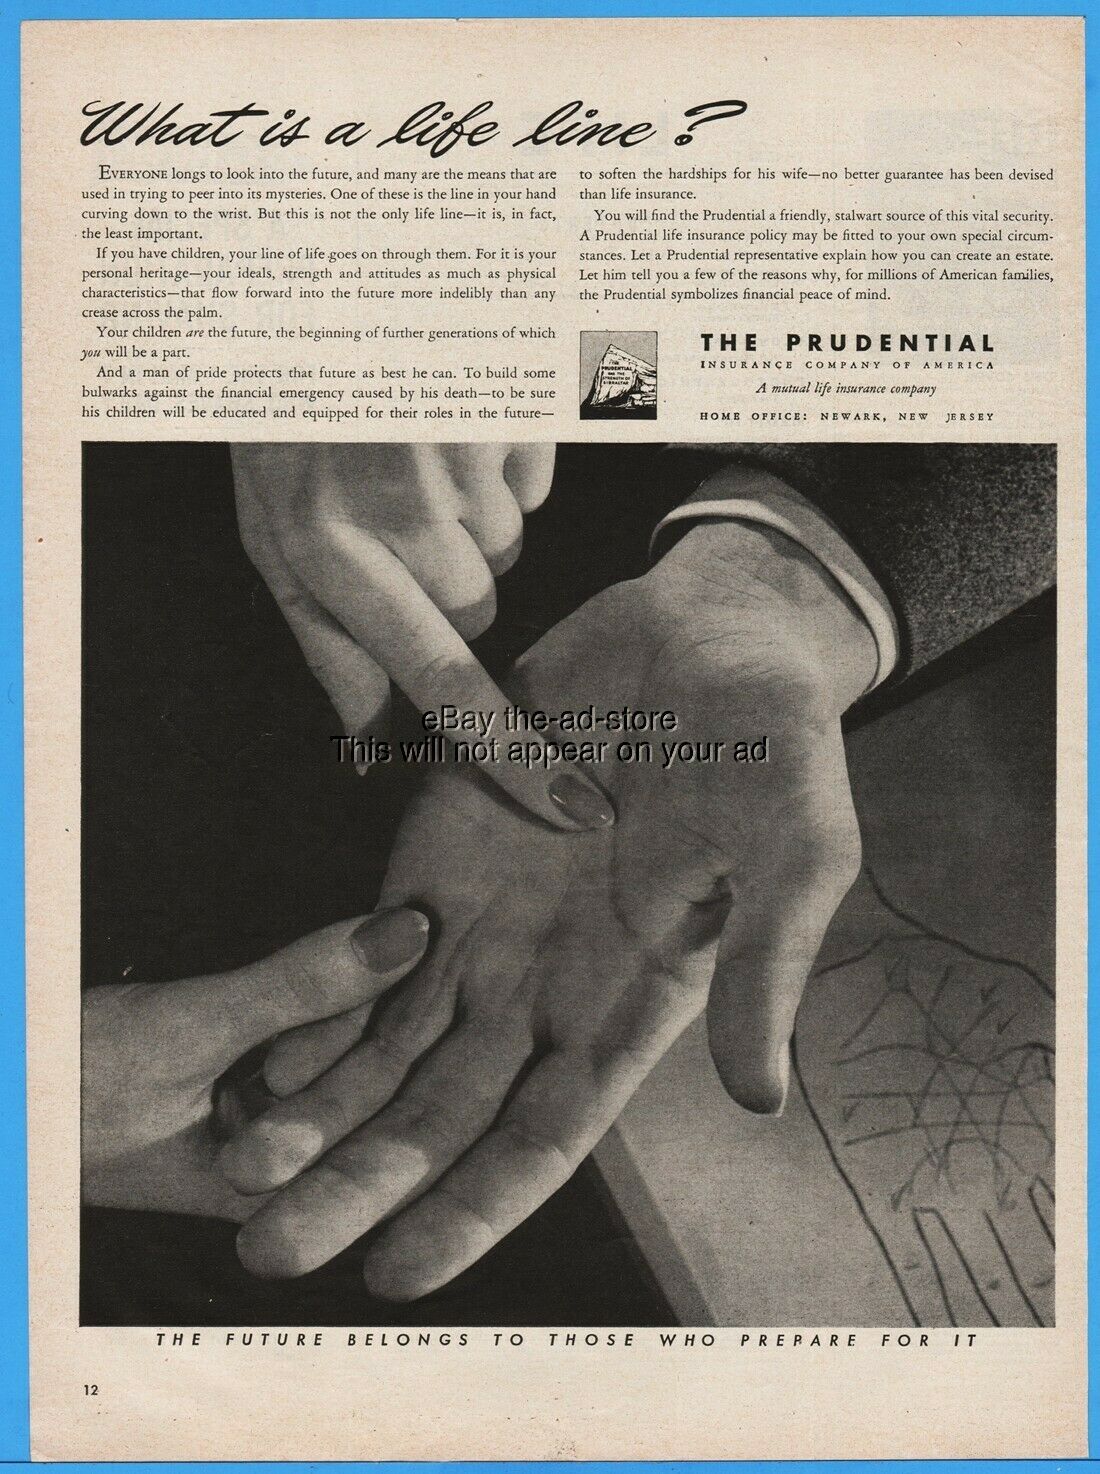 1944 The Prudential Insurance Palm Reader Palmistry What Is A Life Line Photo Ad